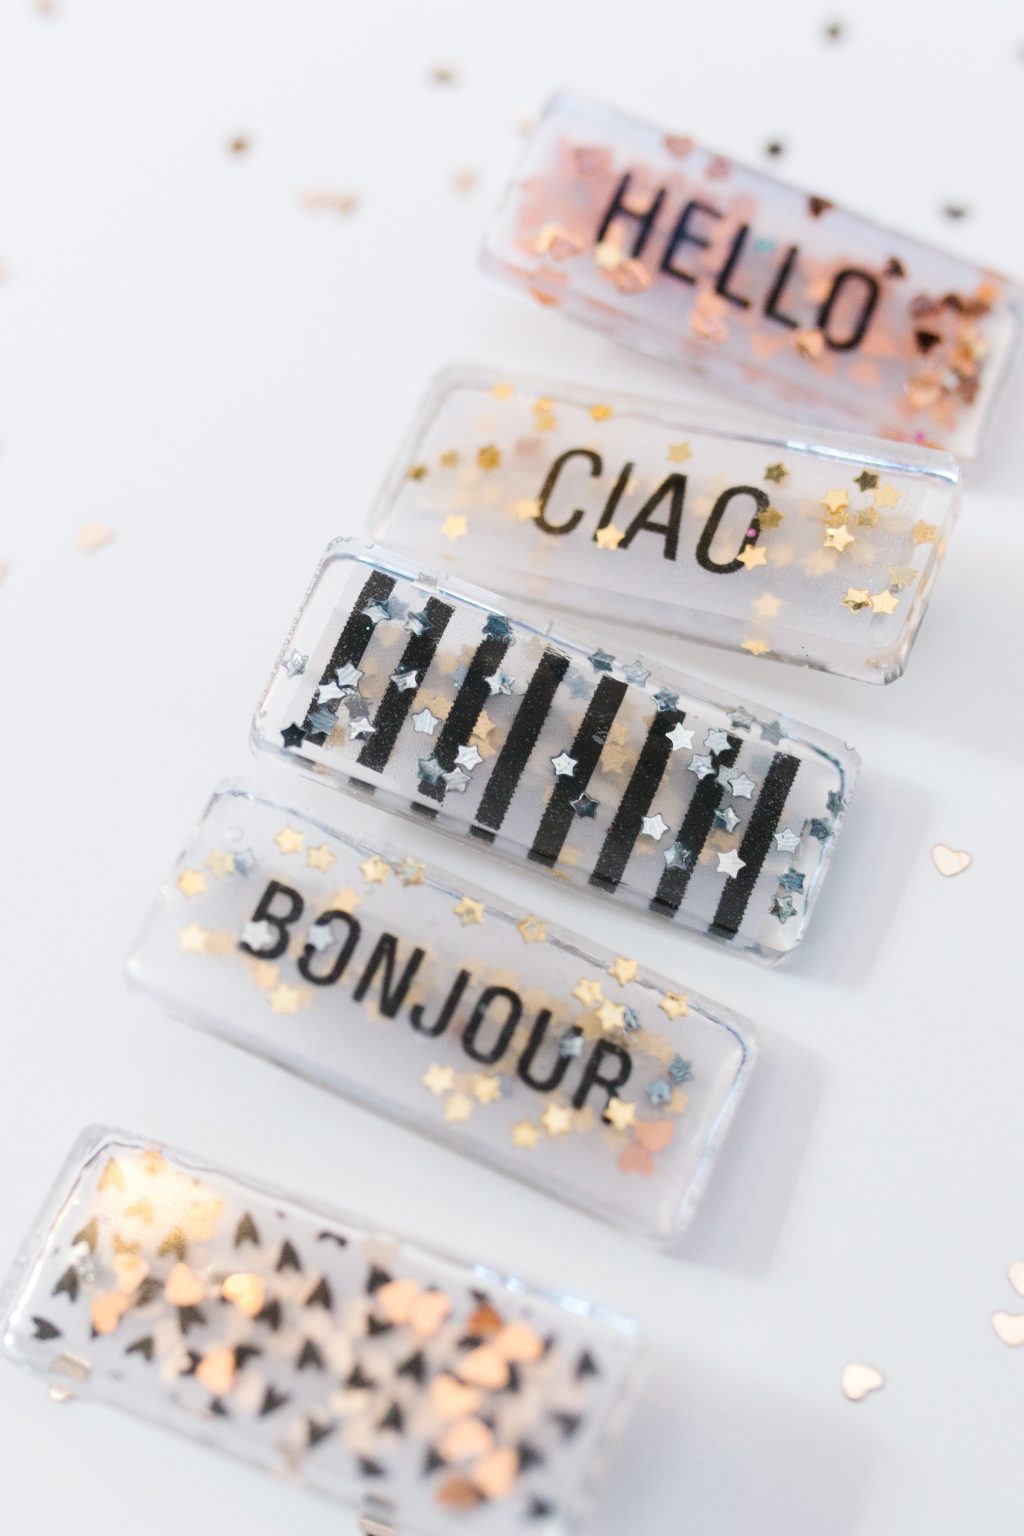 Cute DIY Personalized Resin Barrettes (VIDEO) + a tutorial featured by Top US Craft Blog + The Pretty Life Girls